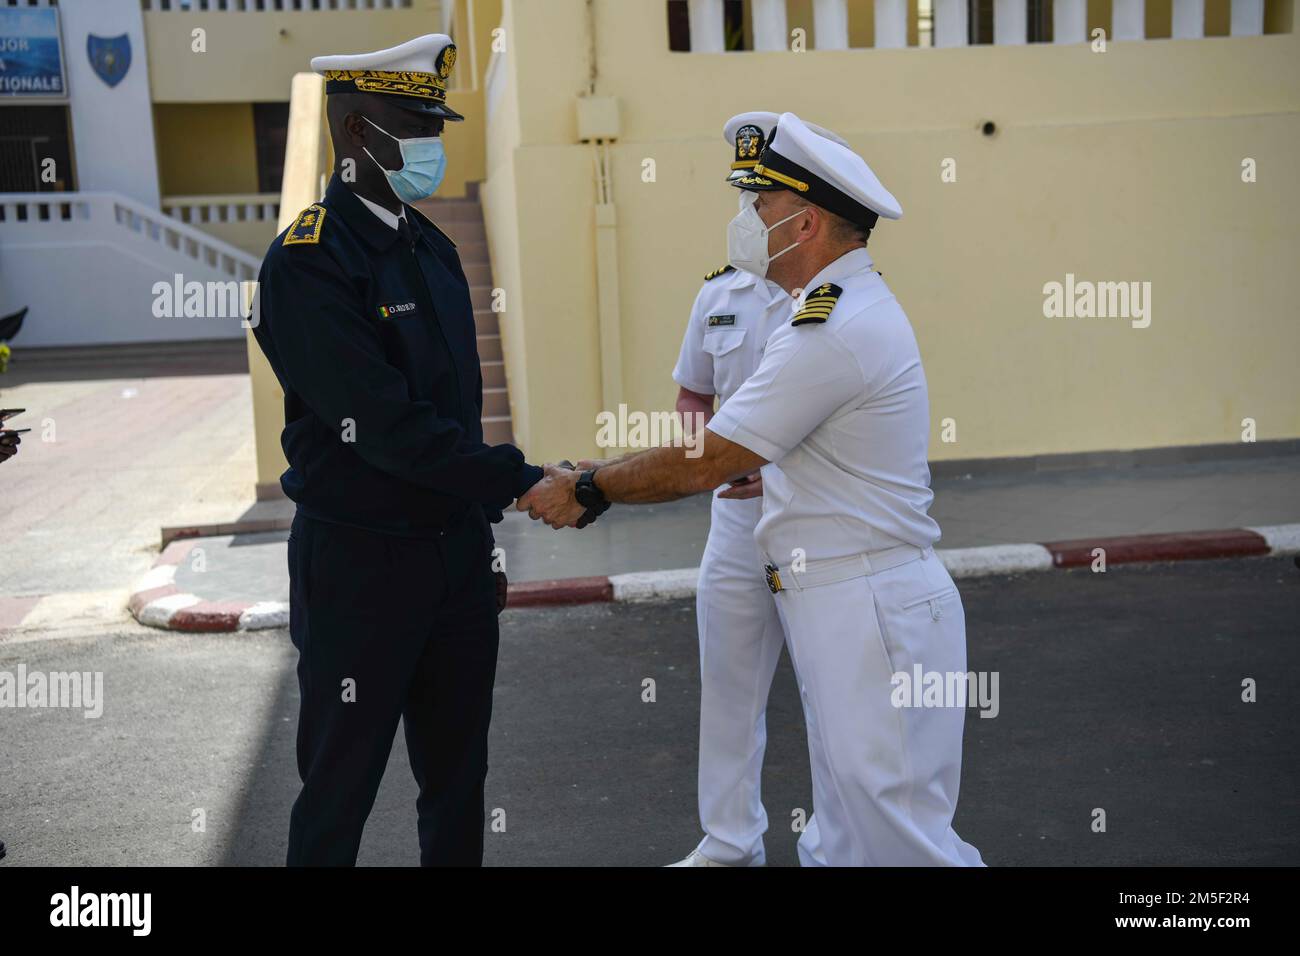 DAKAR, Senegal (Mar. 10, 2022) Rear Adm. Oumar Wade, Senegalese Chief of Navy, left, greets Capt. Michael Concannon, commanding officer of the Expeditionary Sea Base USS Hershel “Woody” Williams (ESB 4), at the Senegalese Naval Headquarters, in Dakar, Senegal, during Exercise Obangame Express 2022, Mar. 10, 2022. Obangame Express 2022, conducted by U.S. Naval Forces Africa, is an at-sea maritime exercise designed to improve cooperation among participating nations in order to increase maritime safety and security in the Gulf of Guinea and West Africa coastal regions. U.S. Sixth Fleet, headquart Stock Photo